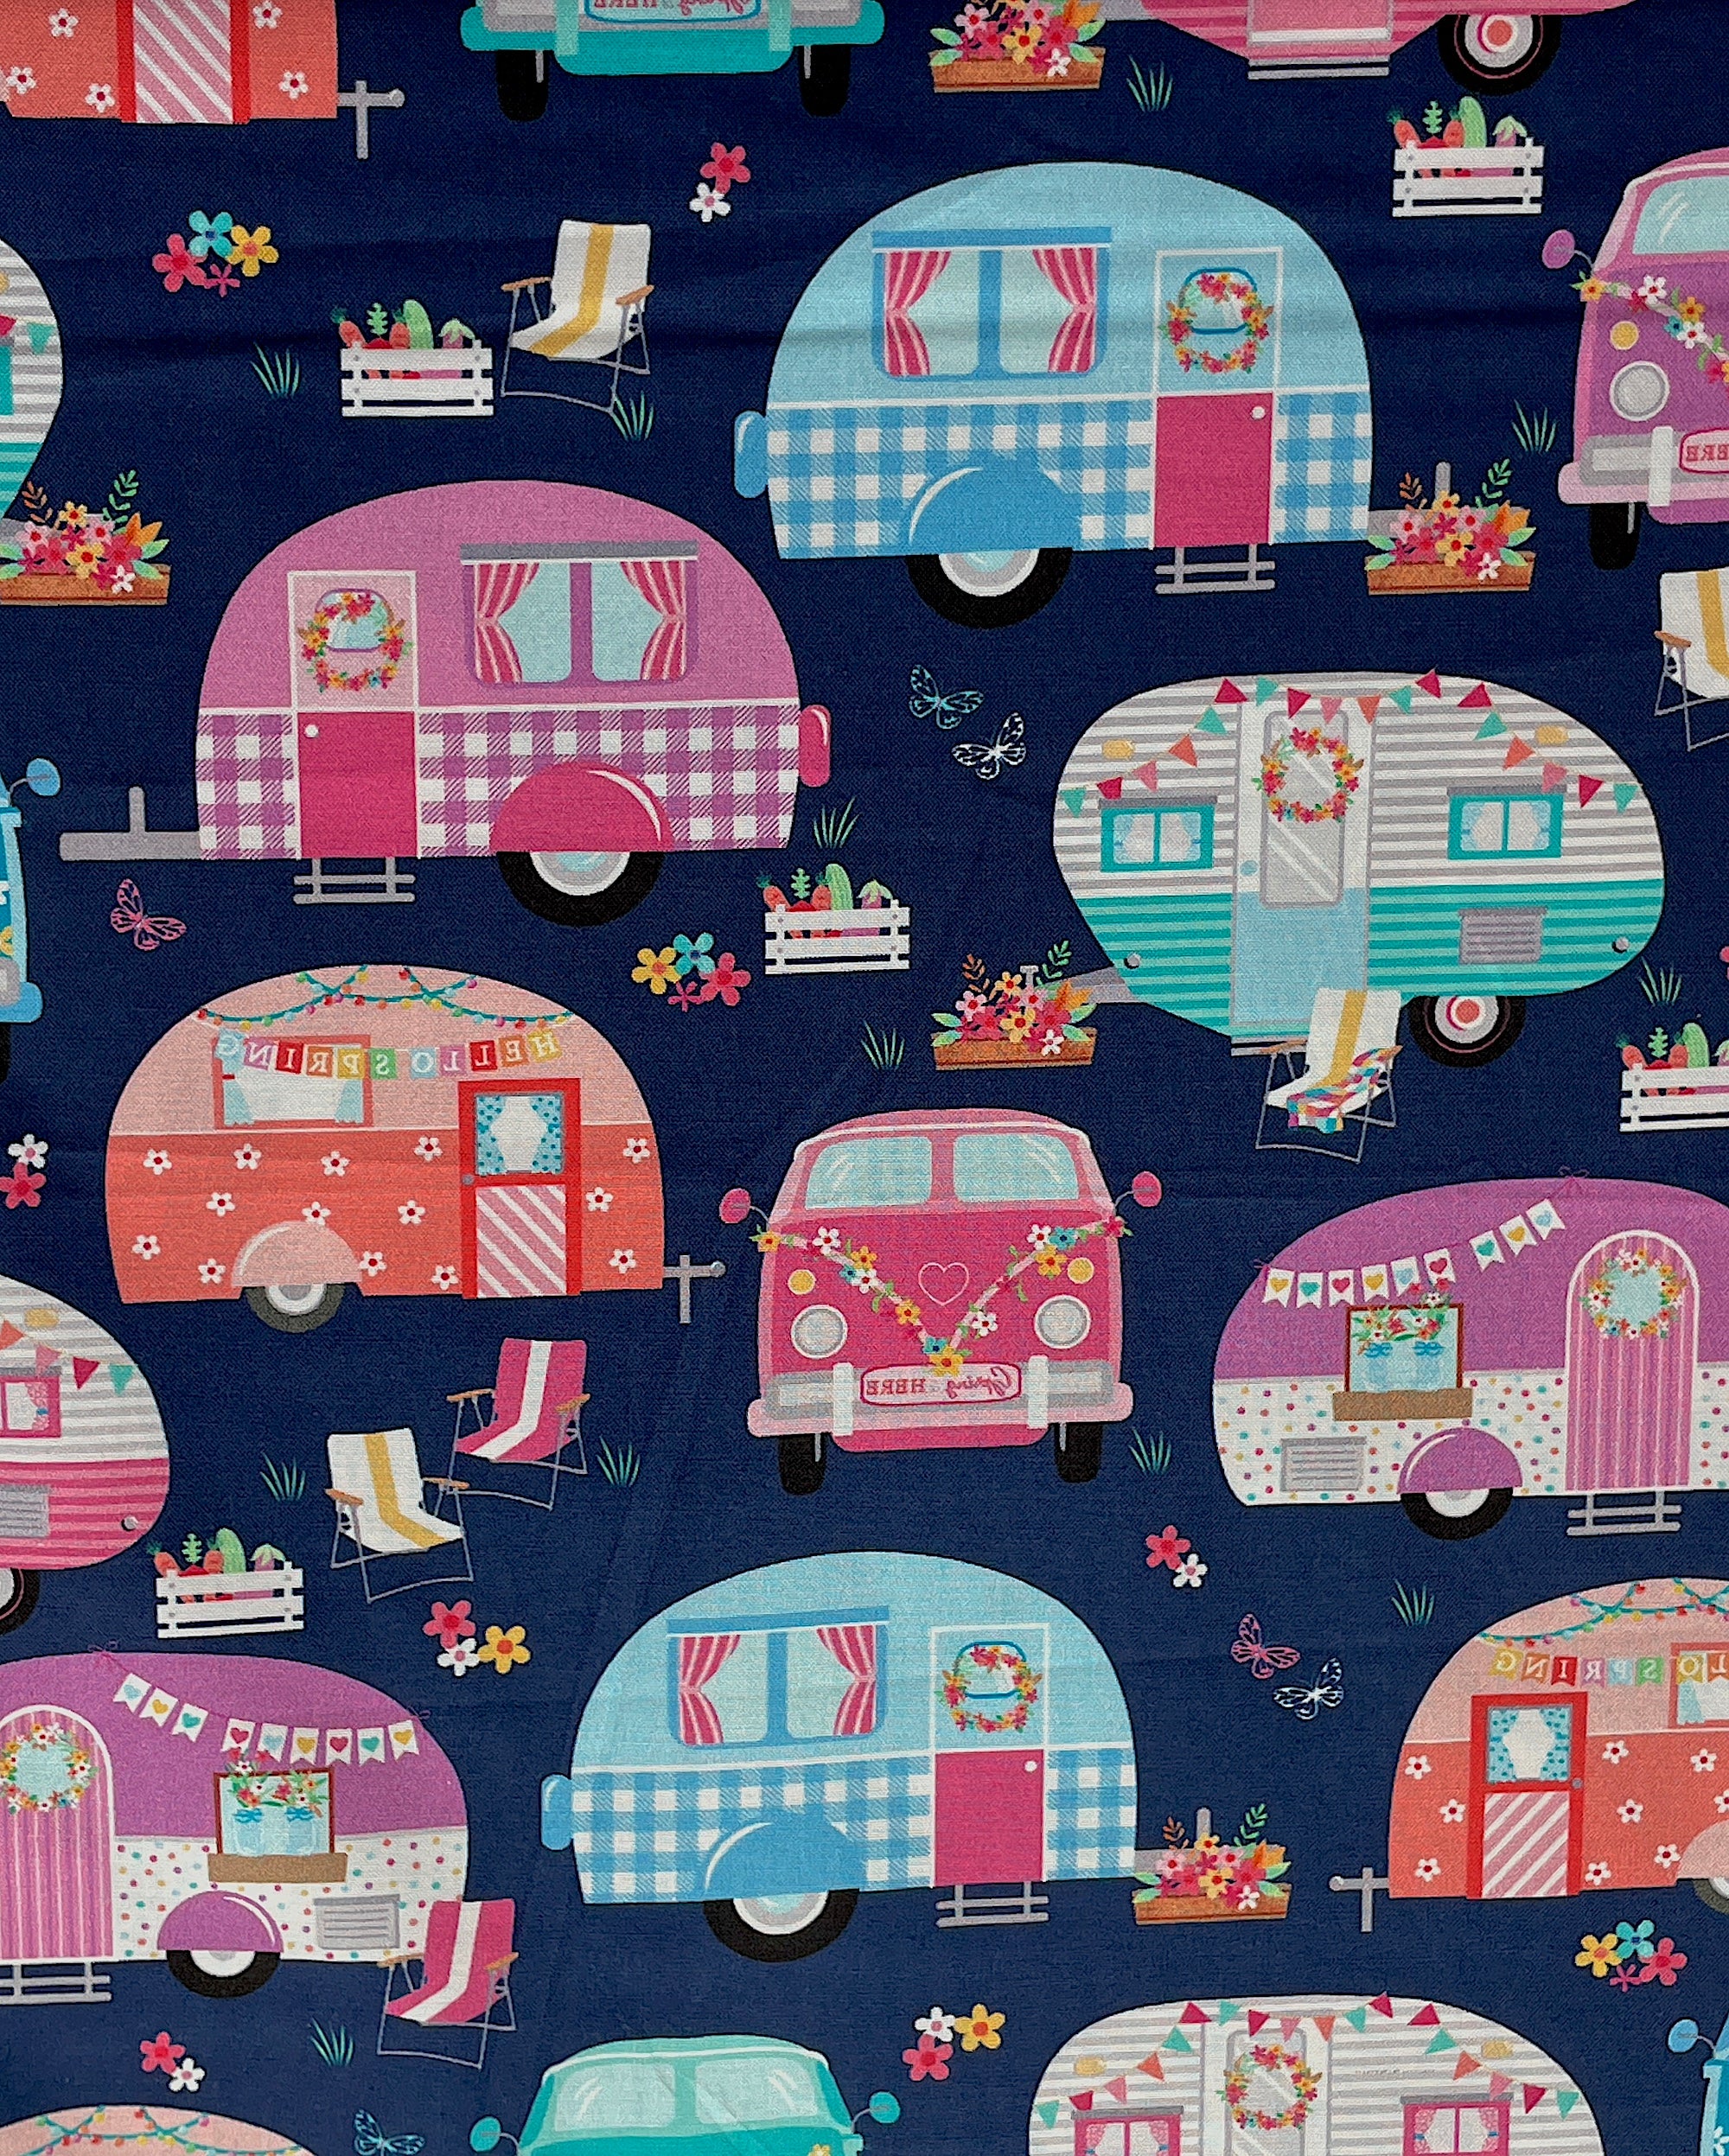 This blue cotton fabric is part of the Enjoy the Ride Collection.&nbsp; This fabric is covered with travel trailers, flowers, butterflies and lawn chairs.&nbsp;